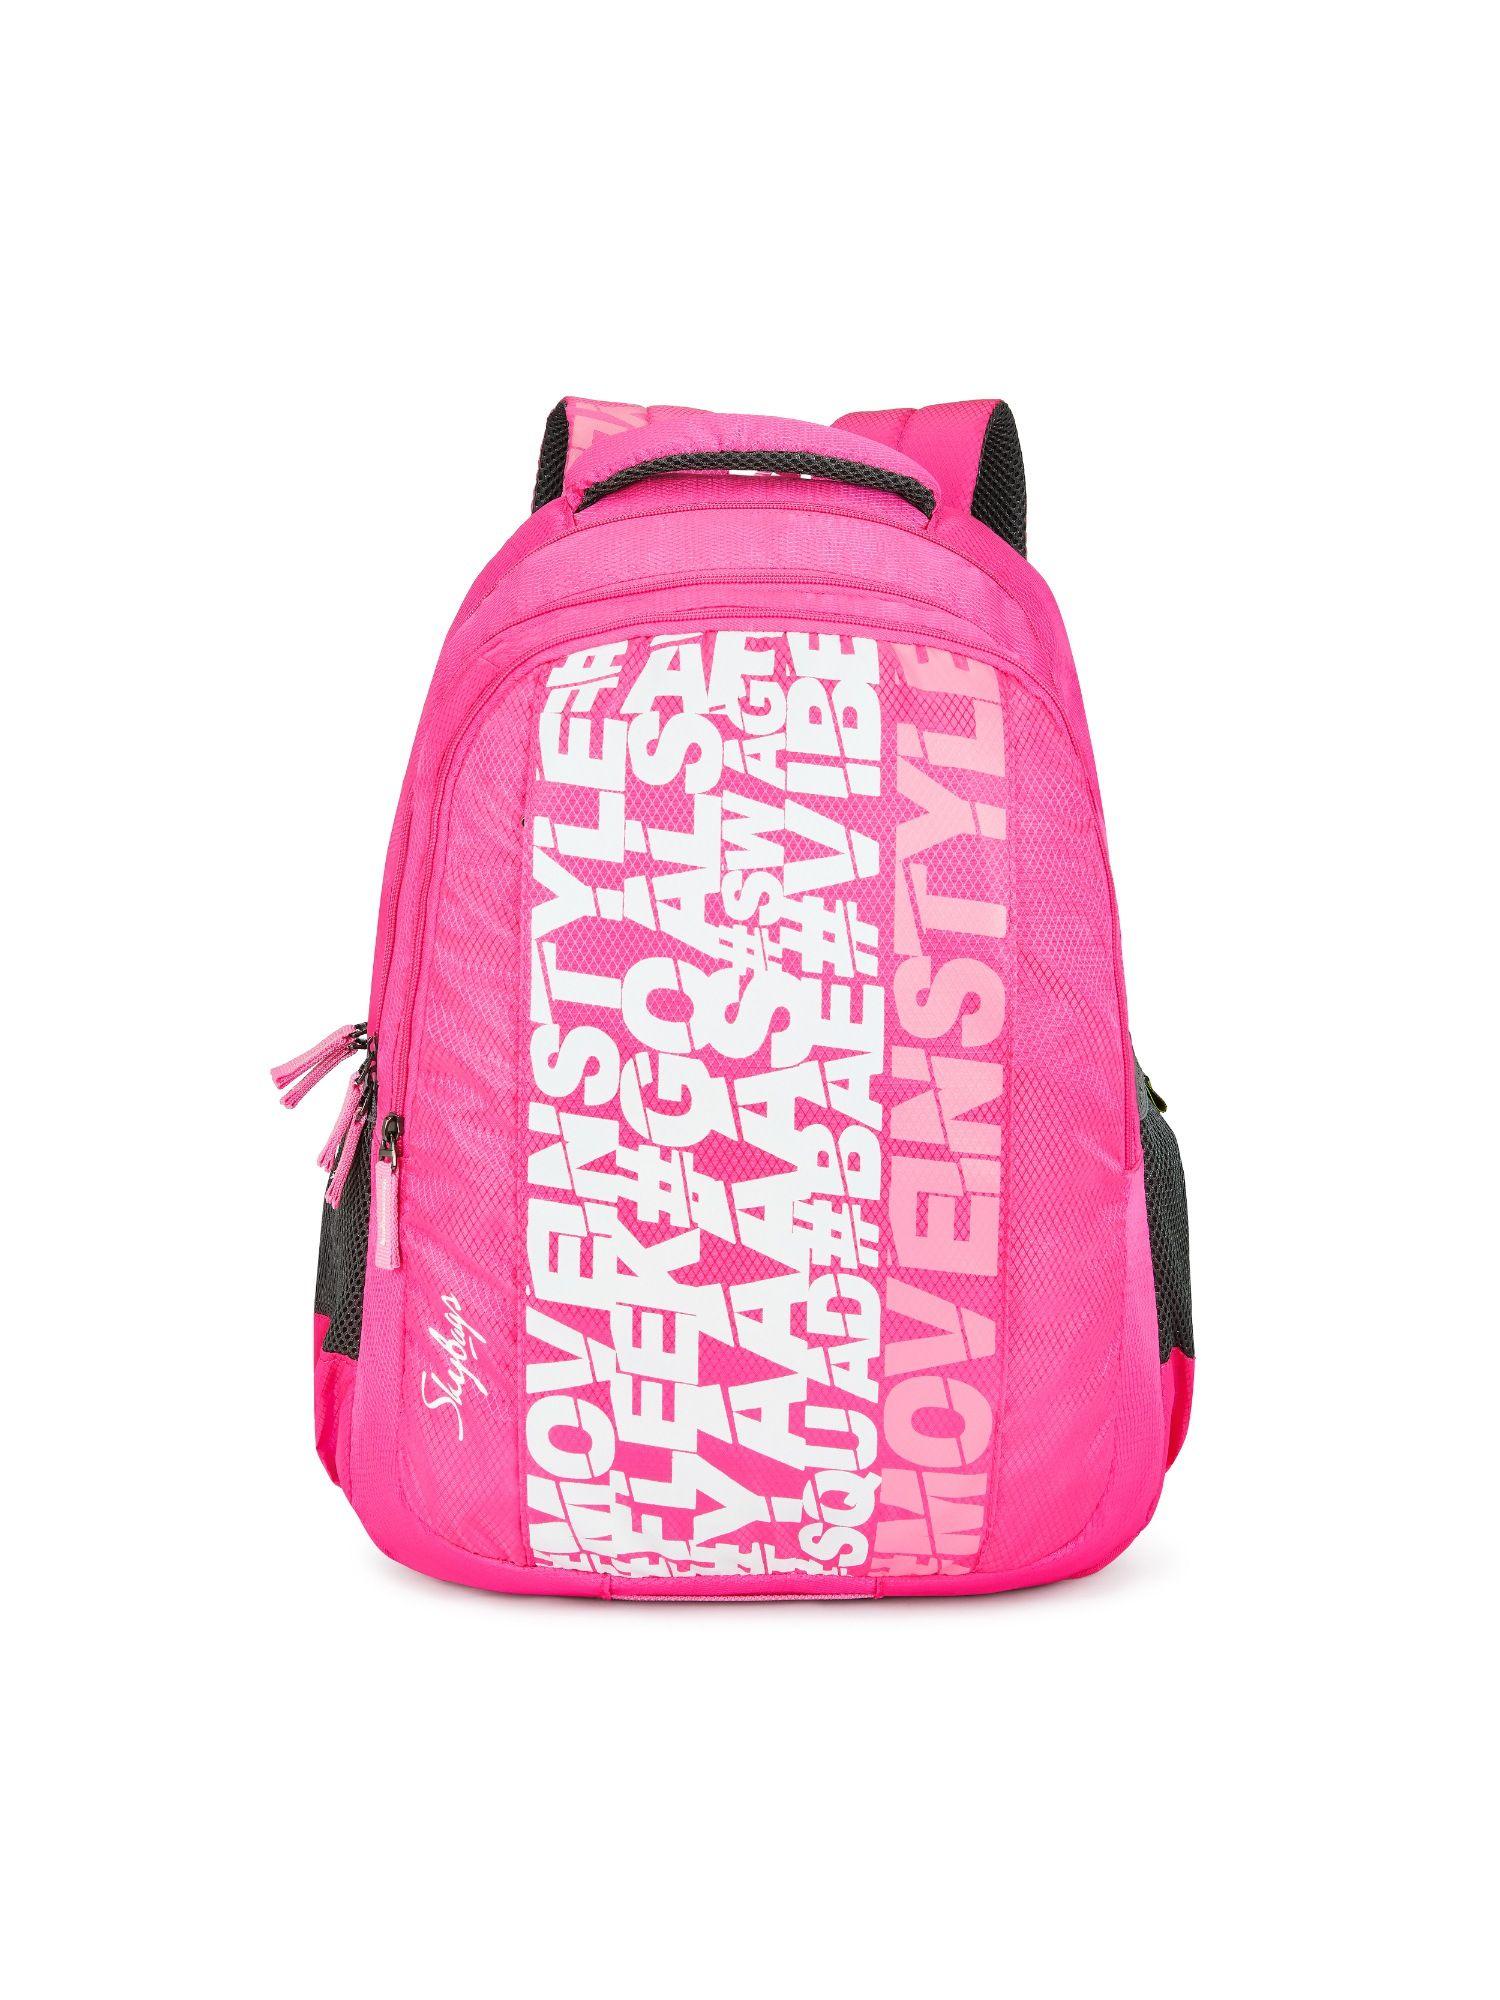 new neon 14 school bag - h pink (7 years and above)